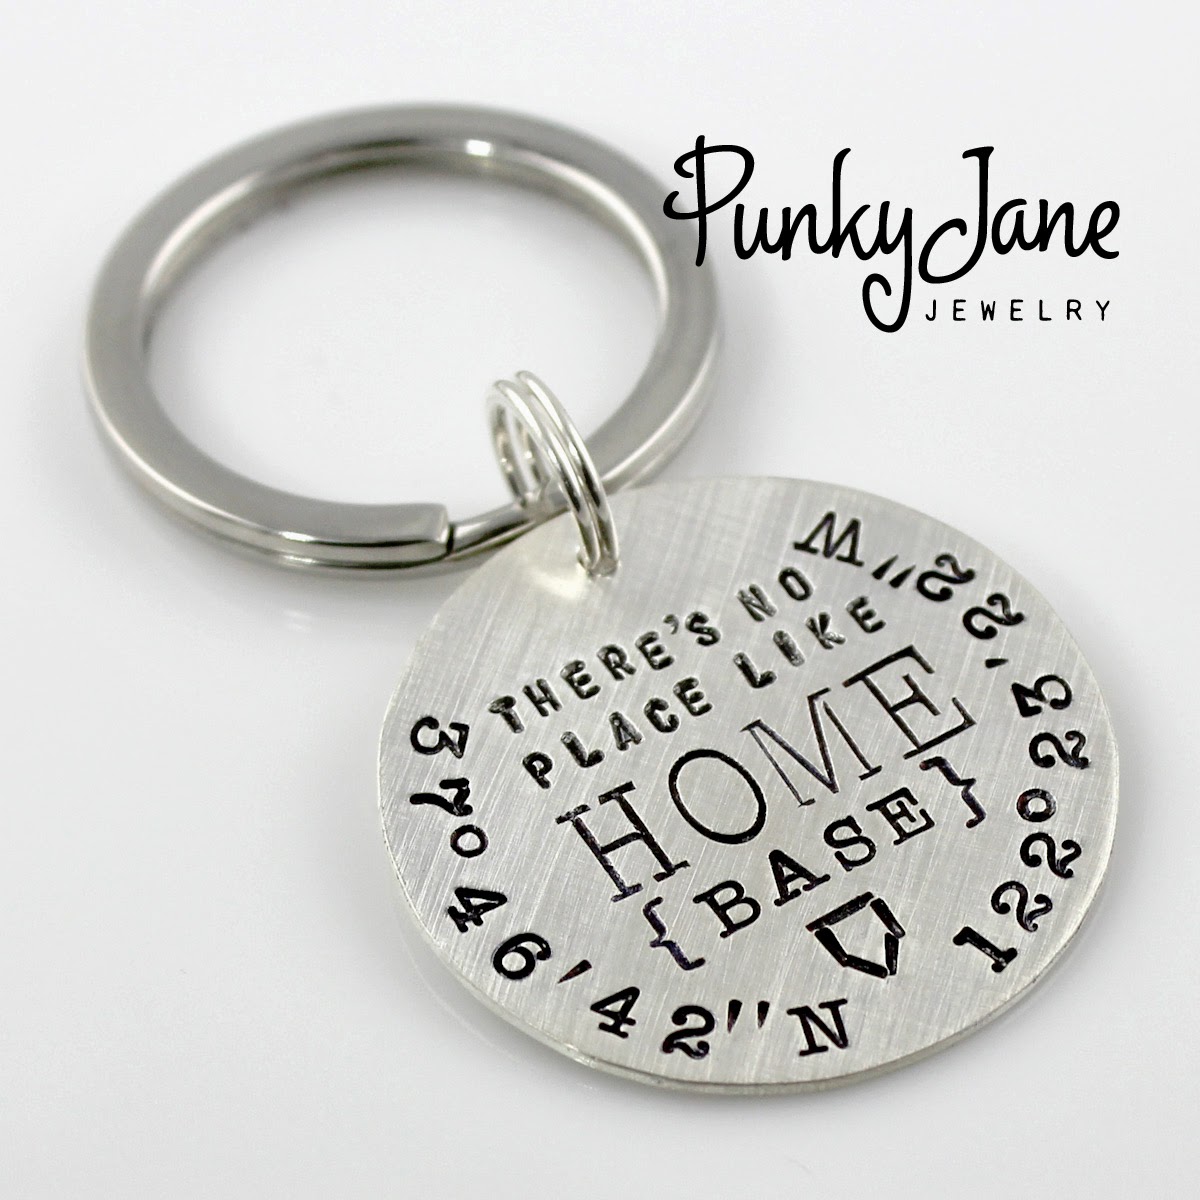 http://shop.punkyjane.com/Theres-No-Place-Like-Home-Base-personalized-sterling-keychain-4056.htm